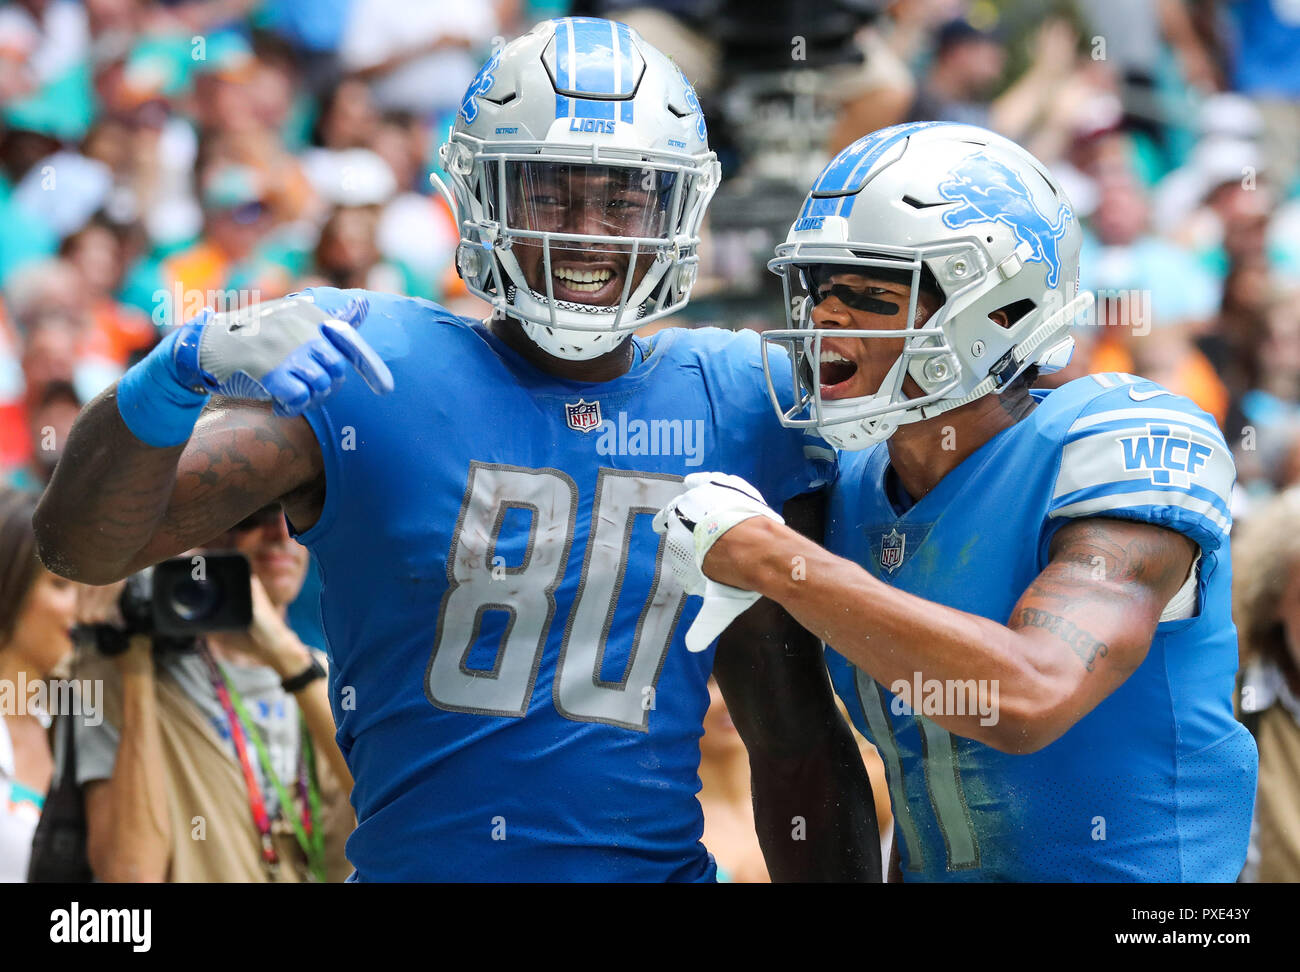 detroit lions game today live